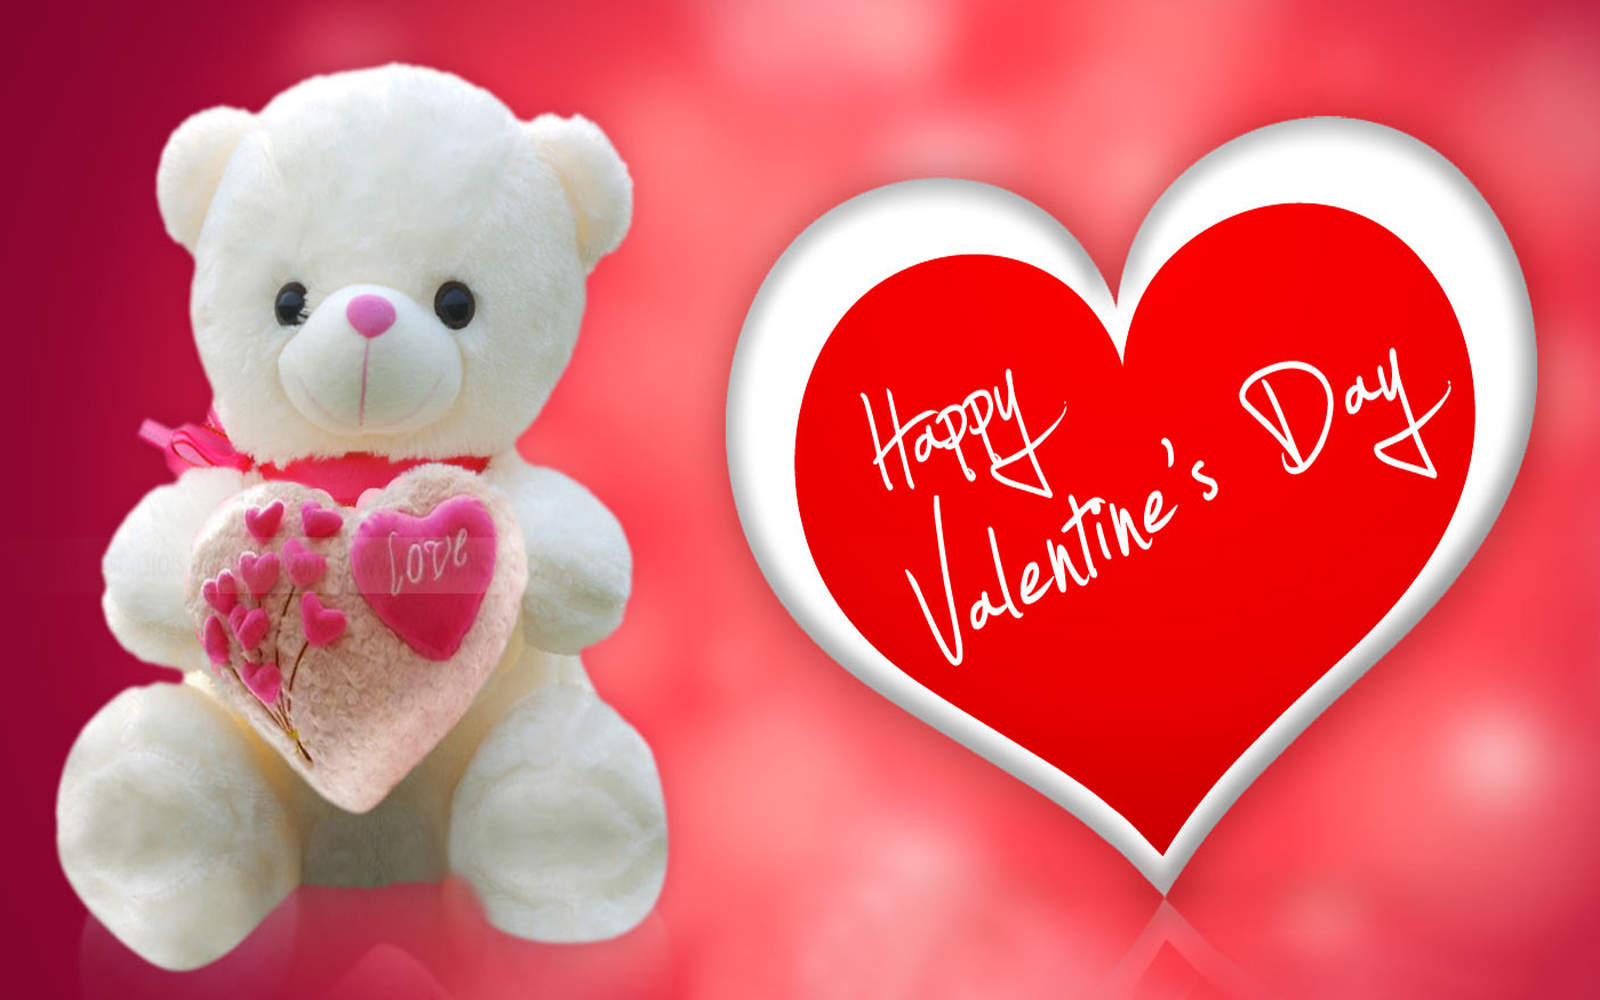 Best Happy Valentines Day 2017 GIF HD Wallpapers for Whatsapp